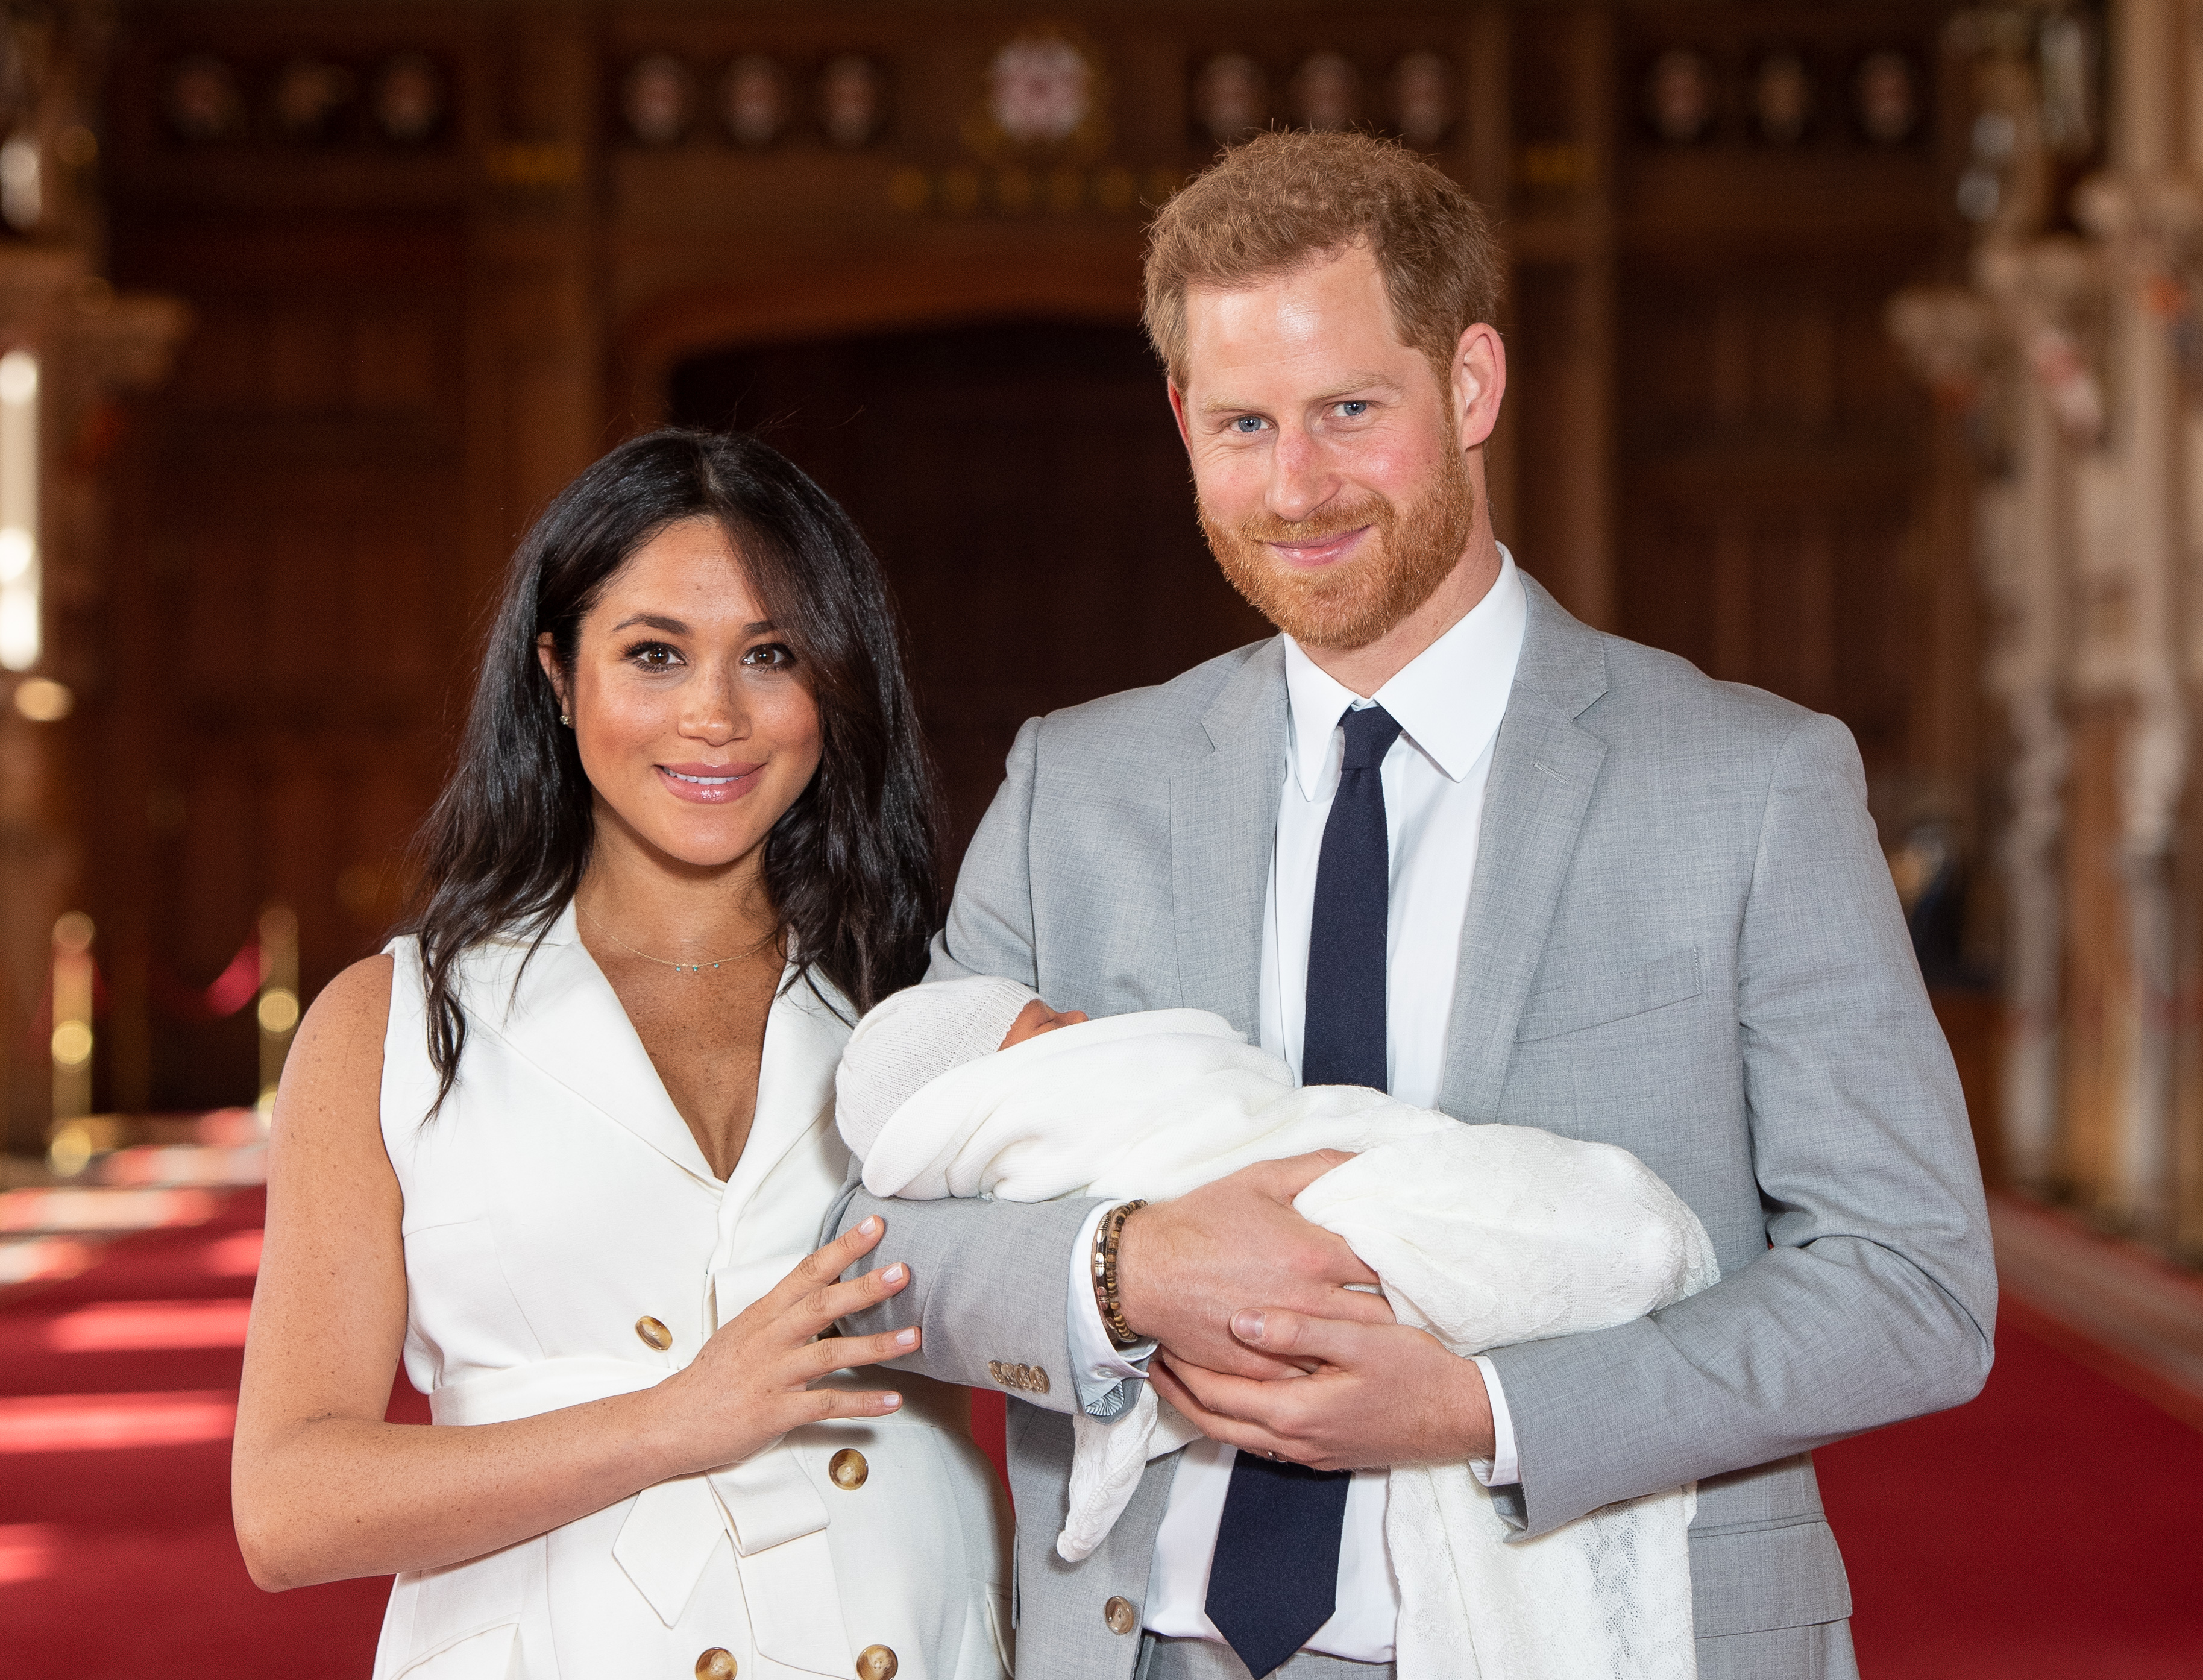 Prince Harry and Meghan Markle with Archie Harrison Mountbatten-Windsor during a photocall in St George's Hall at Windsor Castle on May 8, 2019 in Windsor, England | Source: Getty Images